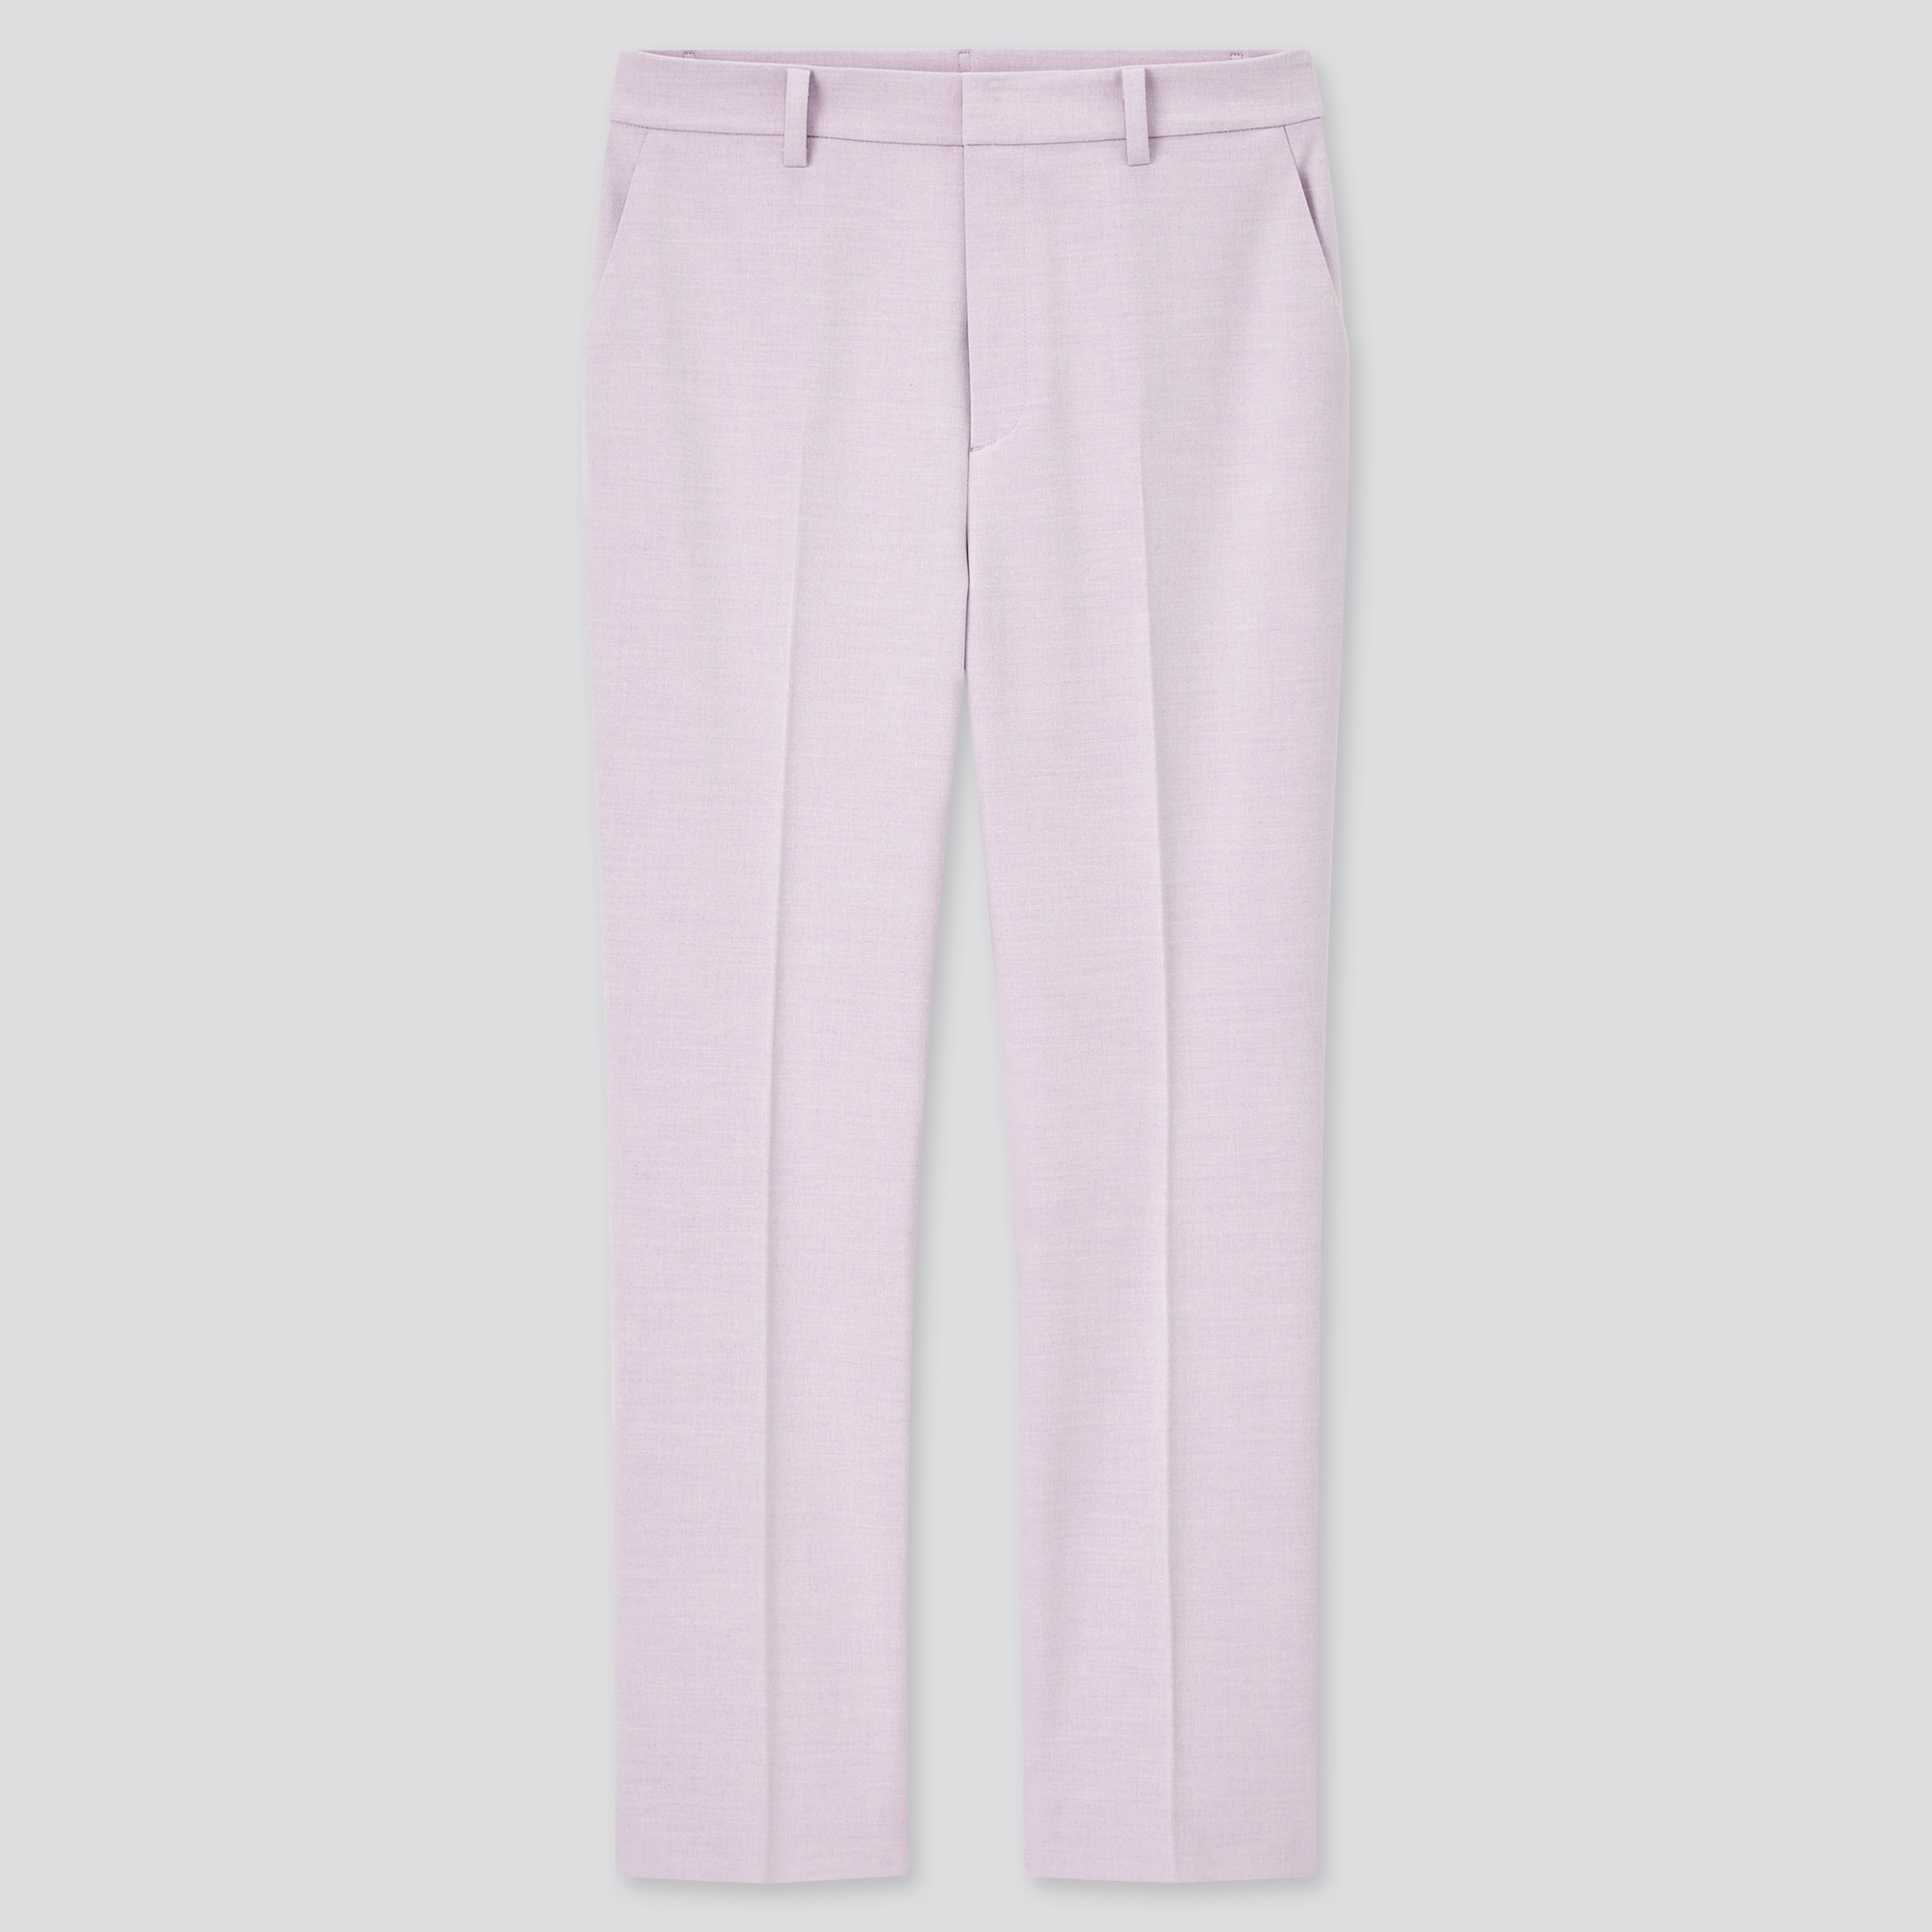 WOMEN EZY ANKLE LENGTH TROUSERS (L28) UNIQLO UK Ankle, 43% OFF